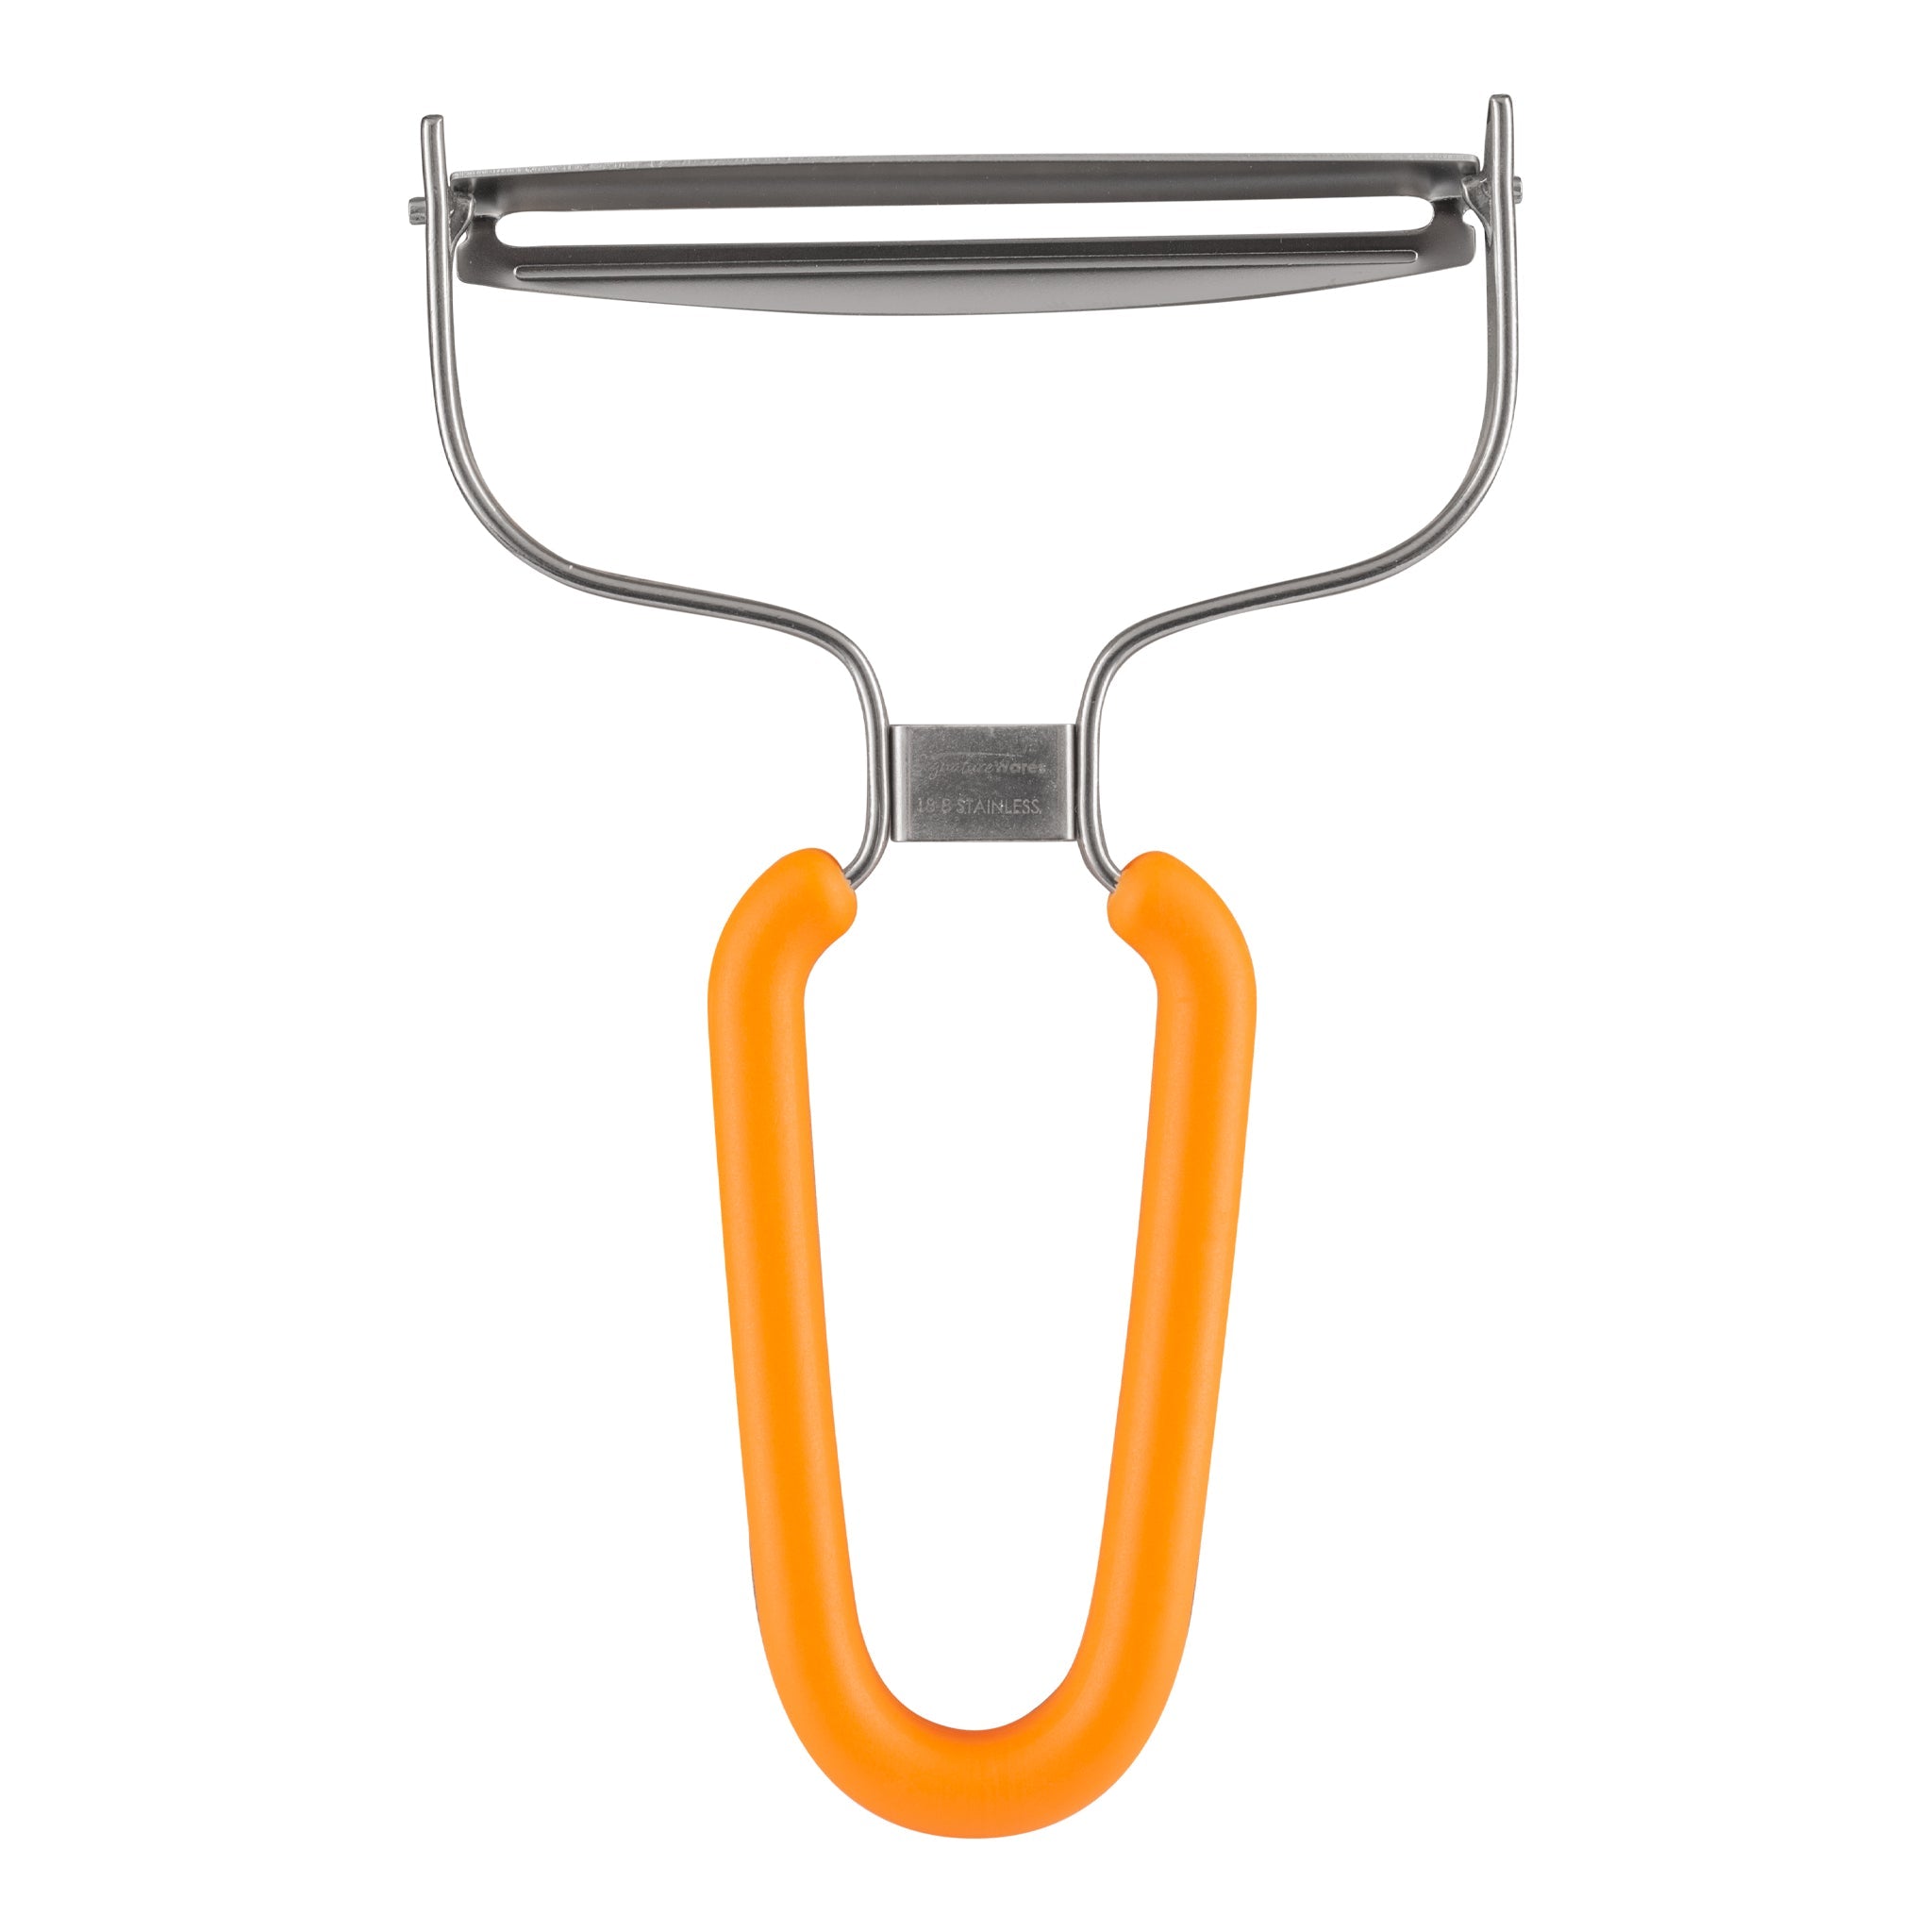 Vegetable peeler with a container for peelings, and a kitchen gadget called  a peeler receptacle for quick rinsing of vegetables and fruits 